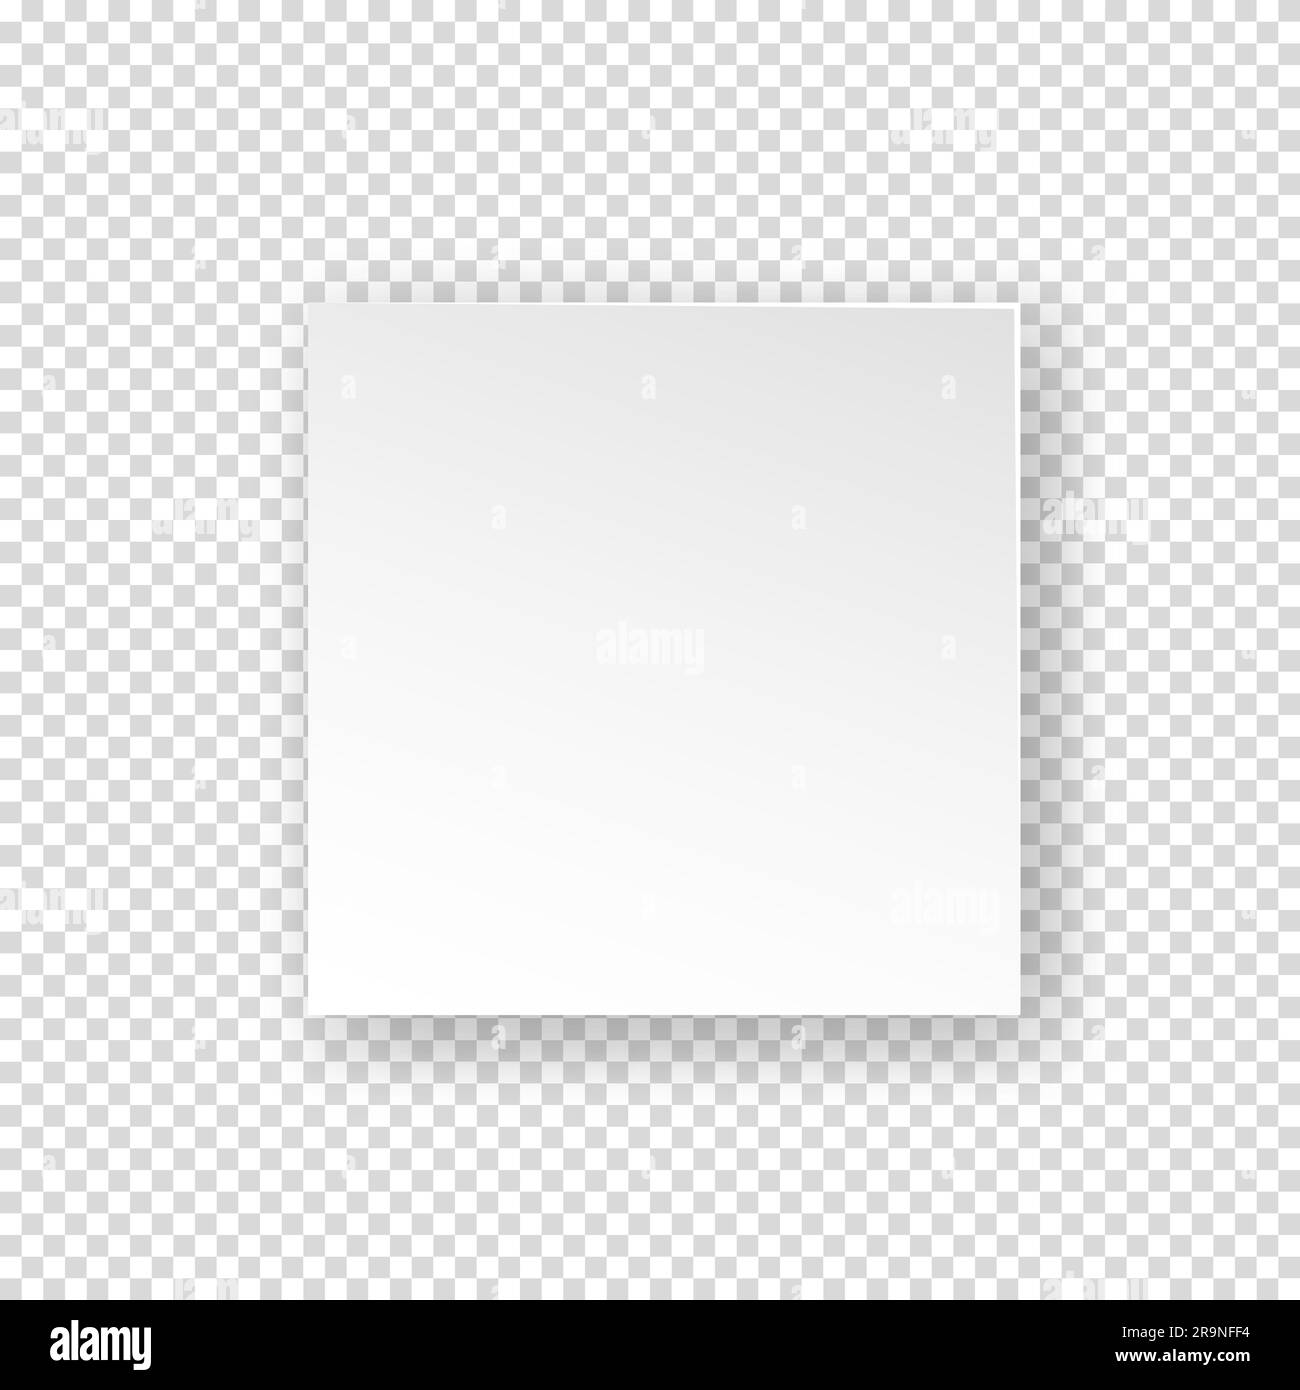 Realistic white picture frame on transparent Vector Image